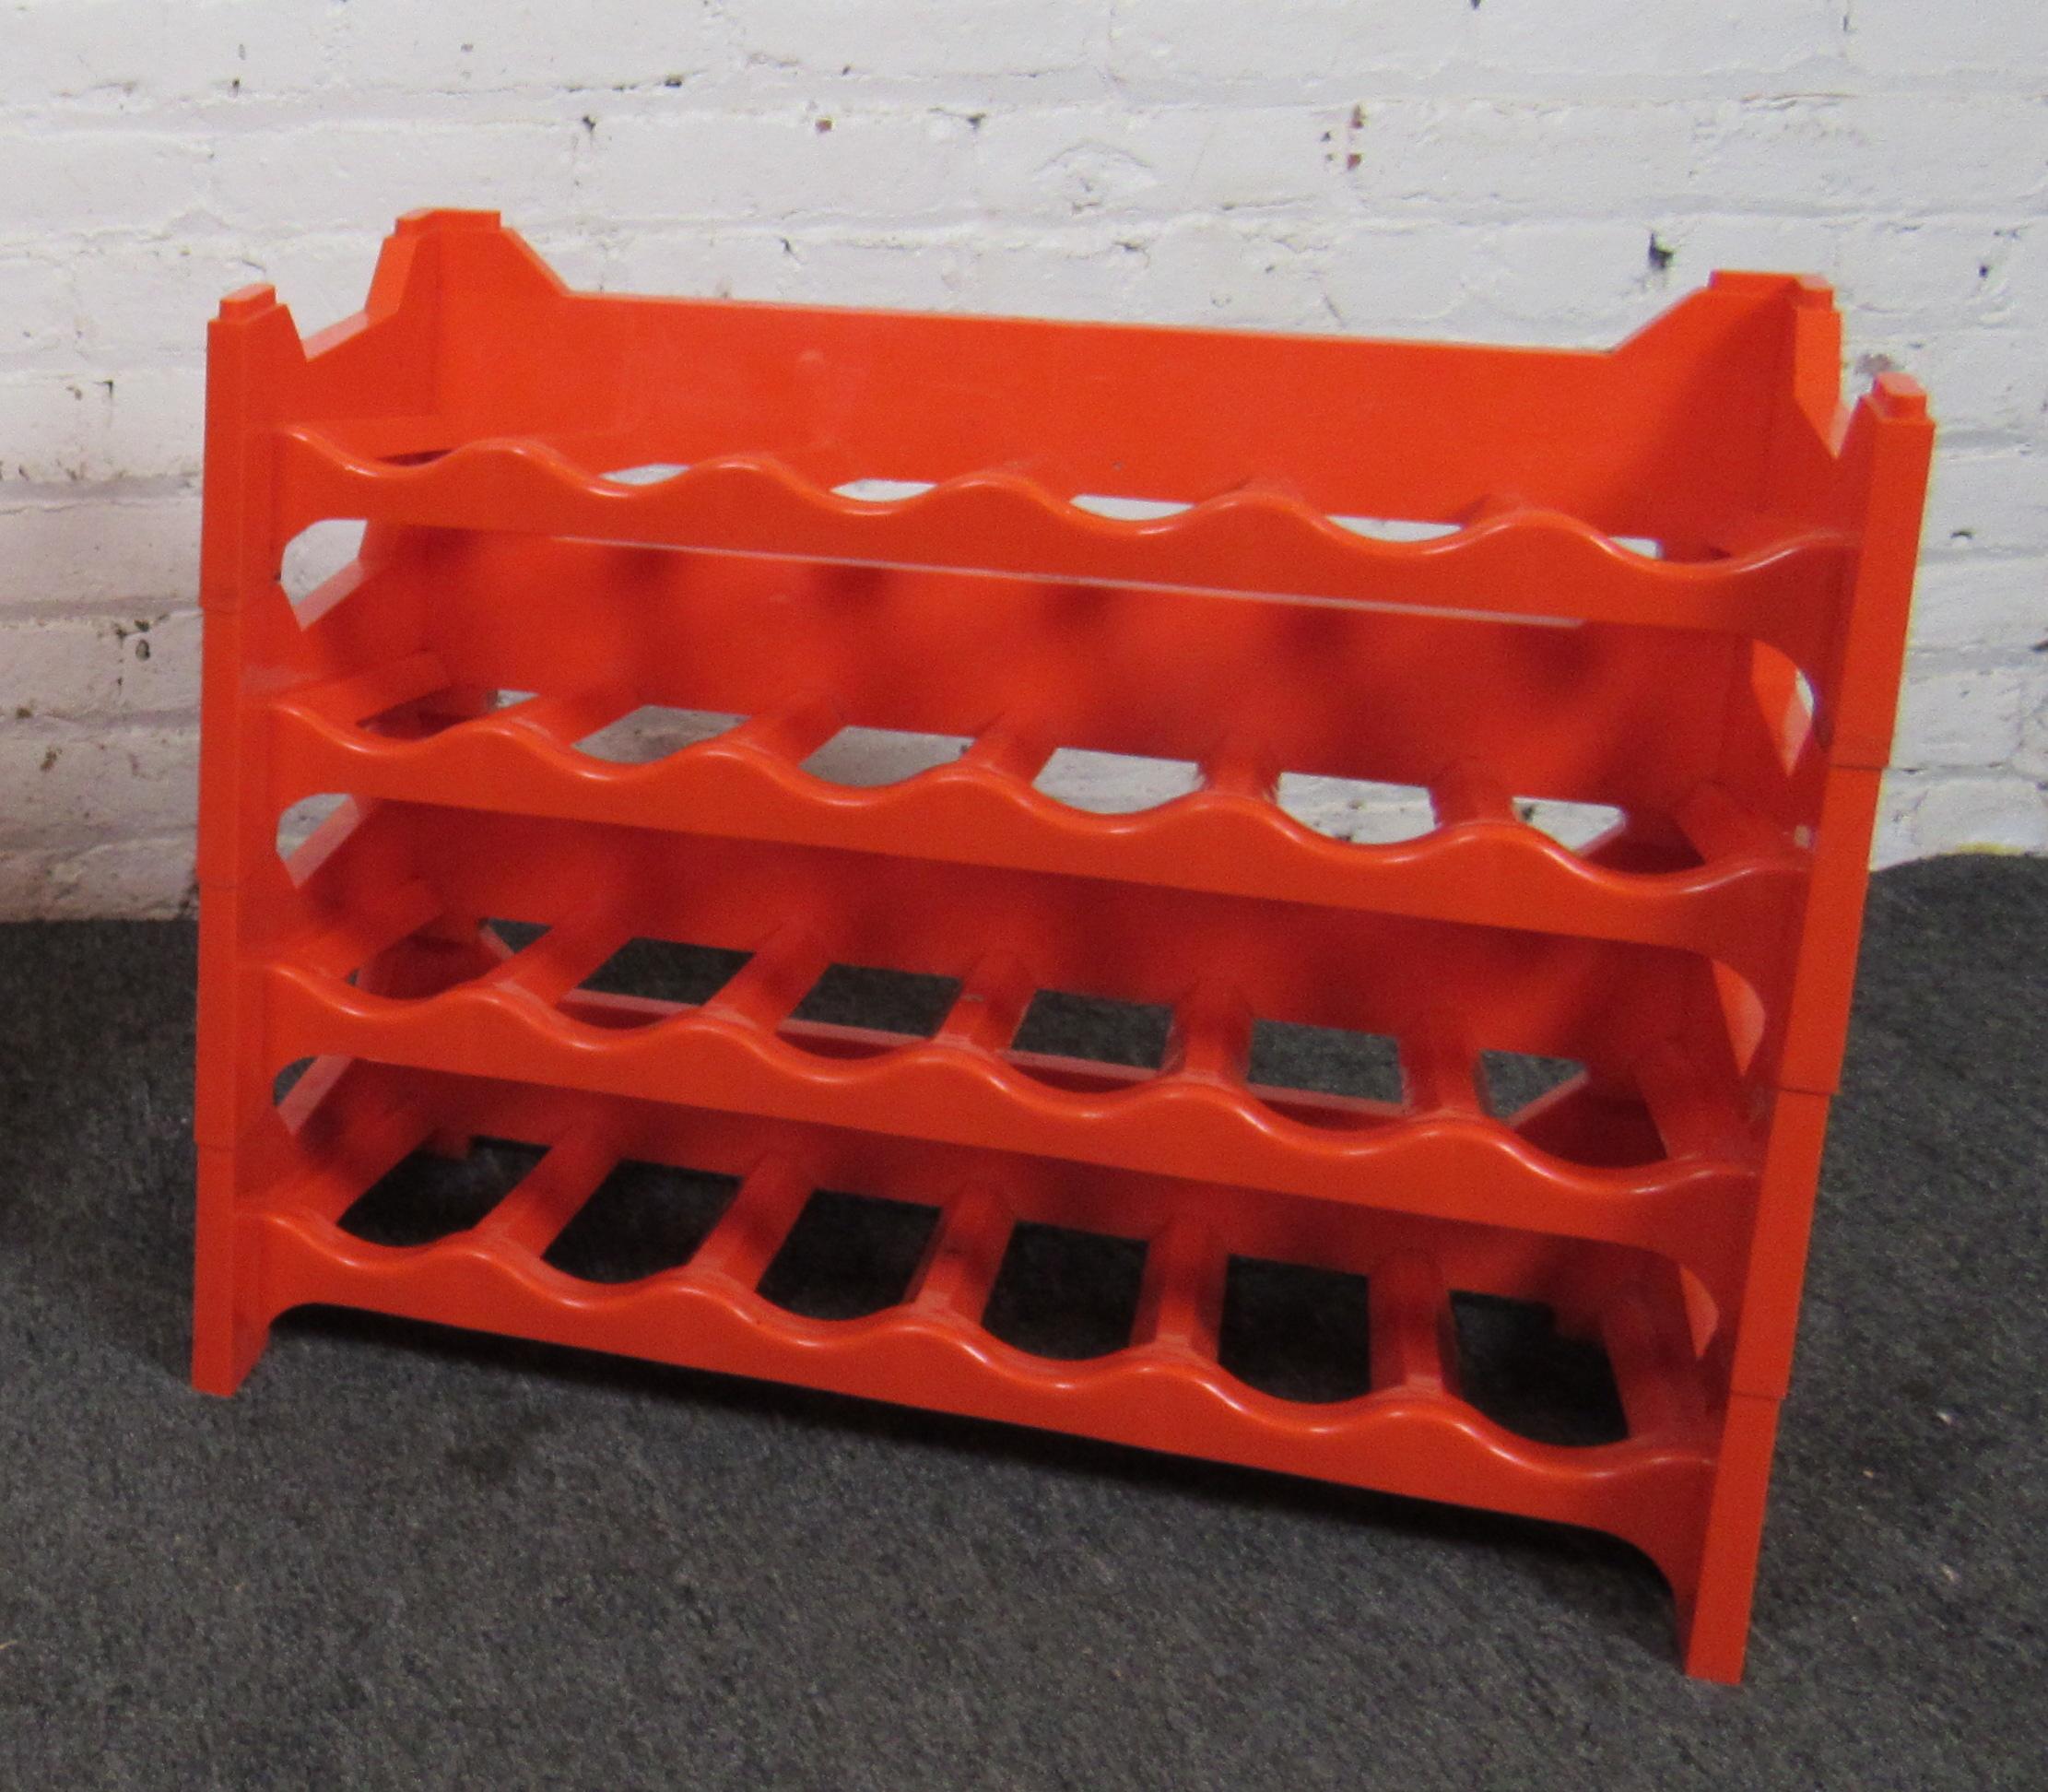 Set of four stacking bottle holders made in Italy. Fun mid-century orange color molds fitting 24 bottles.
Please confirm location NY or NJ.